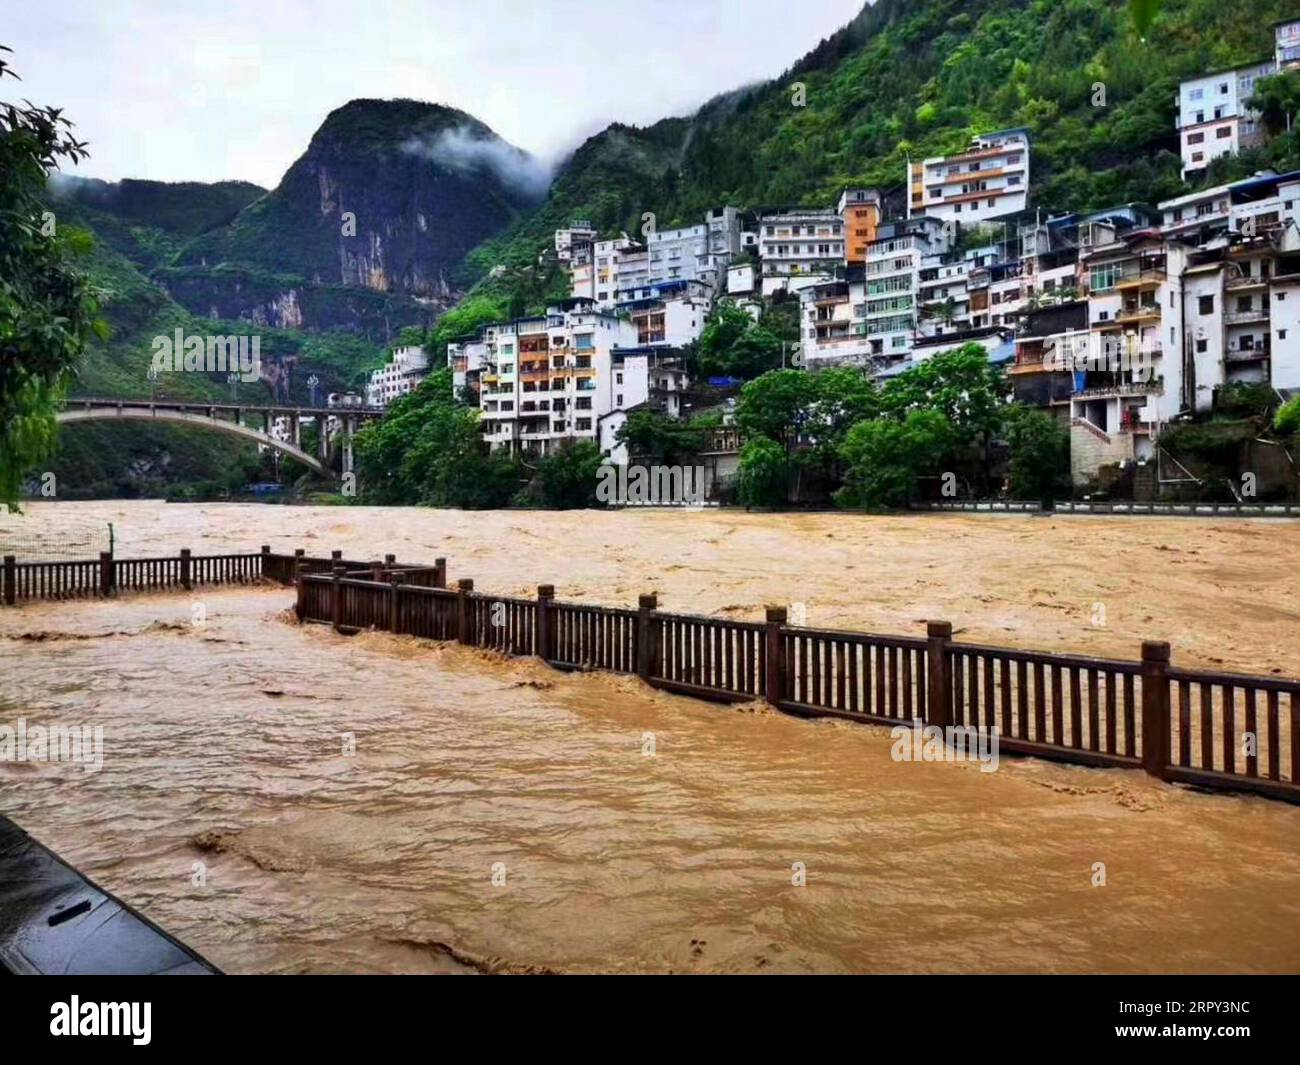 News Bilder des Tages 200612 -- CHONGQING, June 12, 2020 Xinhua -- Photo taken on June 12, 2020 shows a pavement submerged by flood water in Wuxi County, southwest China s Chongqing. Vehement rainstorms have claimed one life while four others are missing in southwest China s Chongqing Municipality, local authorities confirmed Friday. Photo by Jiang Yan/Xinhua CHINA-CHONGQING-RAINSTORM CN PUBLICATIONxNOTxINxCHN Stock Photo